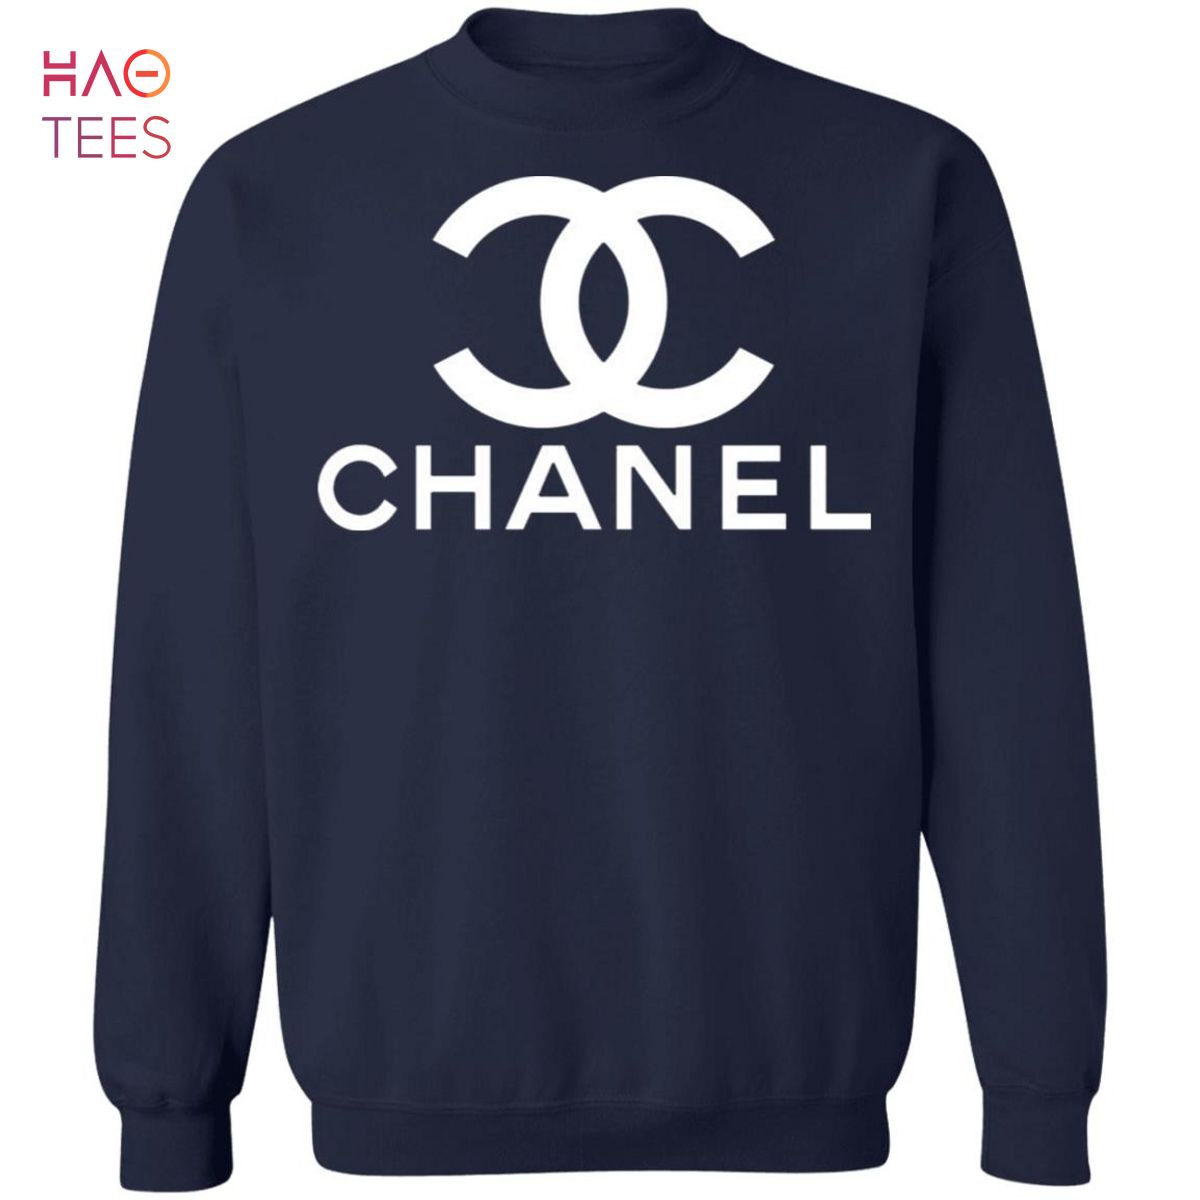 HOT Chanel Sweater